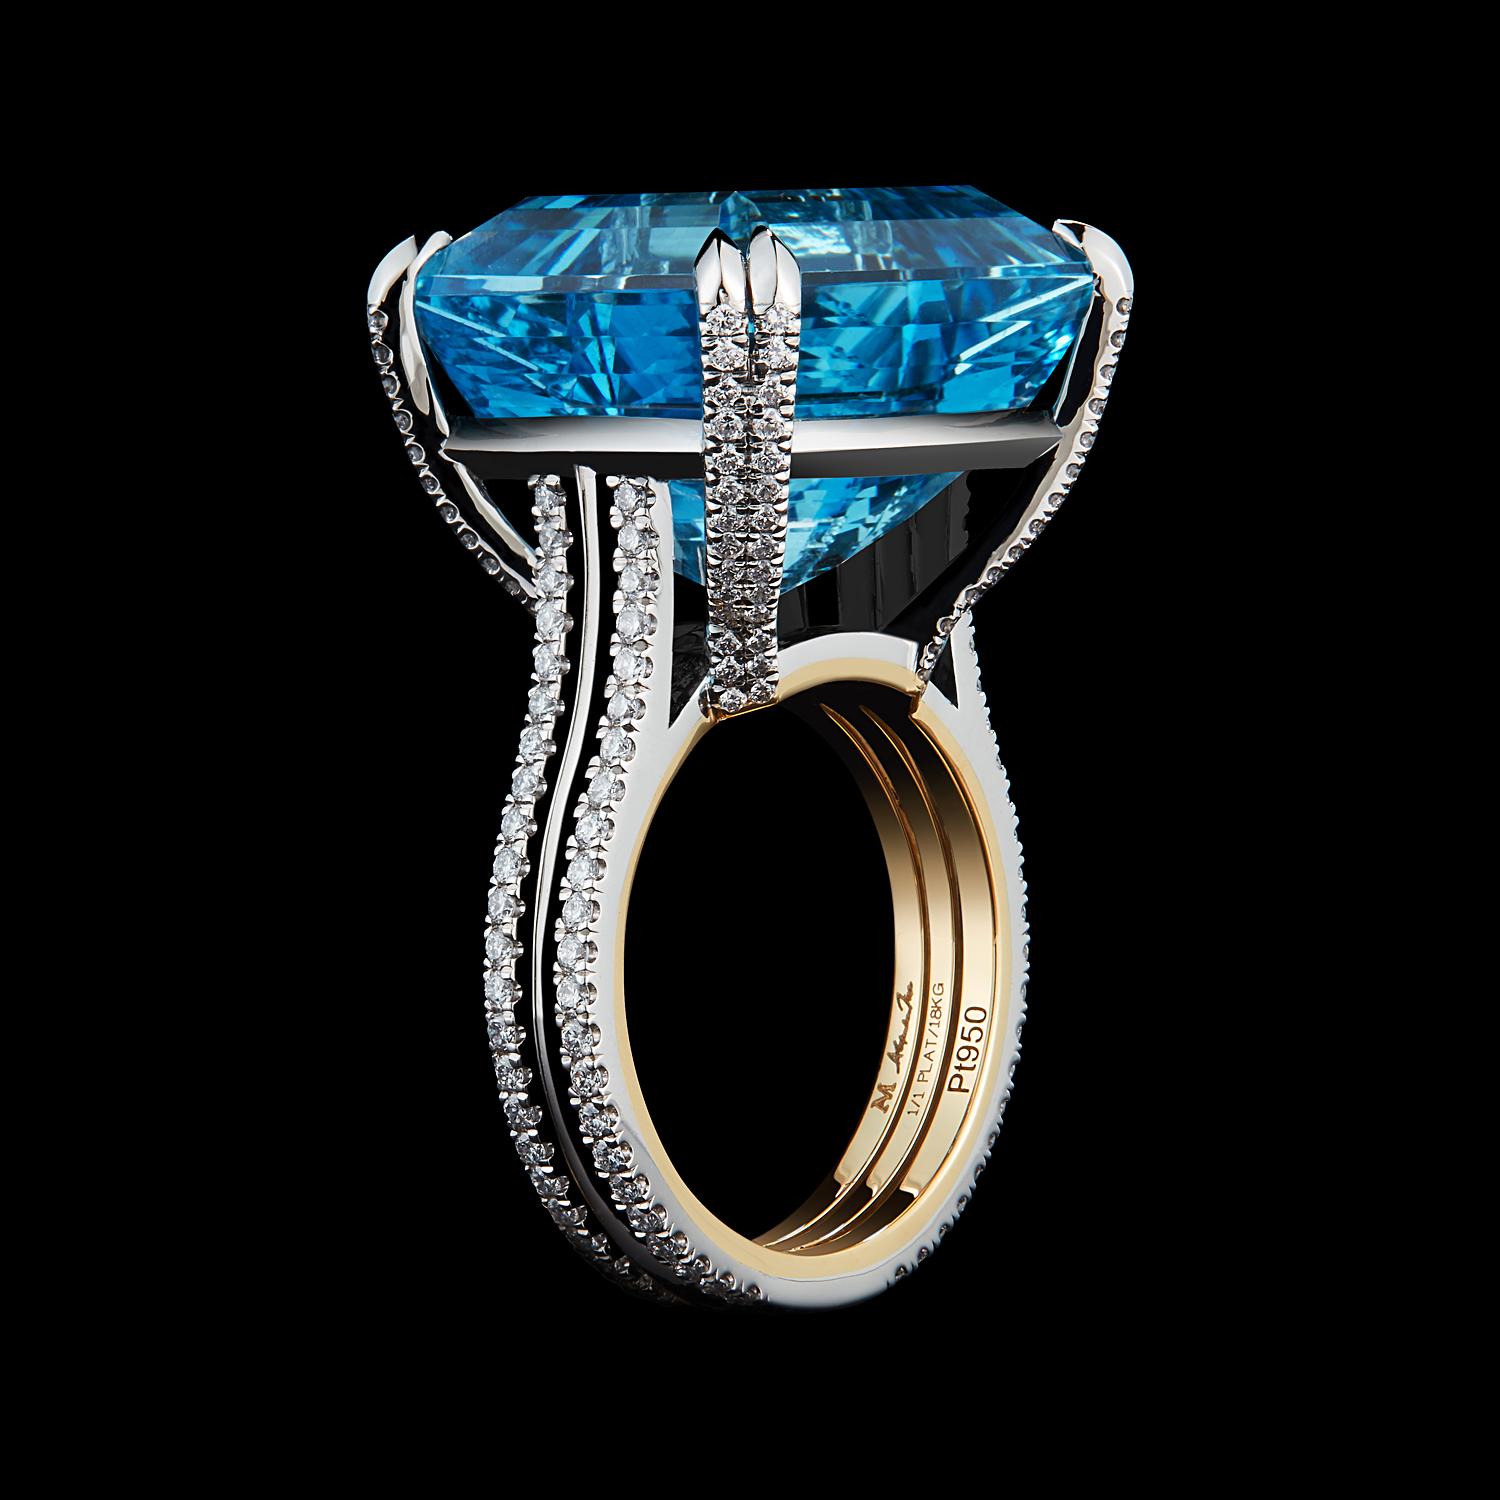 *Please contact us for more information on this piece or on creating your own Alexandra Mor custom Design. 

A one-of-a-kind Alexandra Mor ring featuring a 23.45 carat Emerald-cut Aquamarine detailed with Alexandra Mor's signature 1mm knife-edged